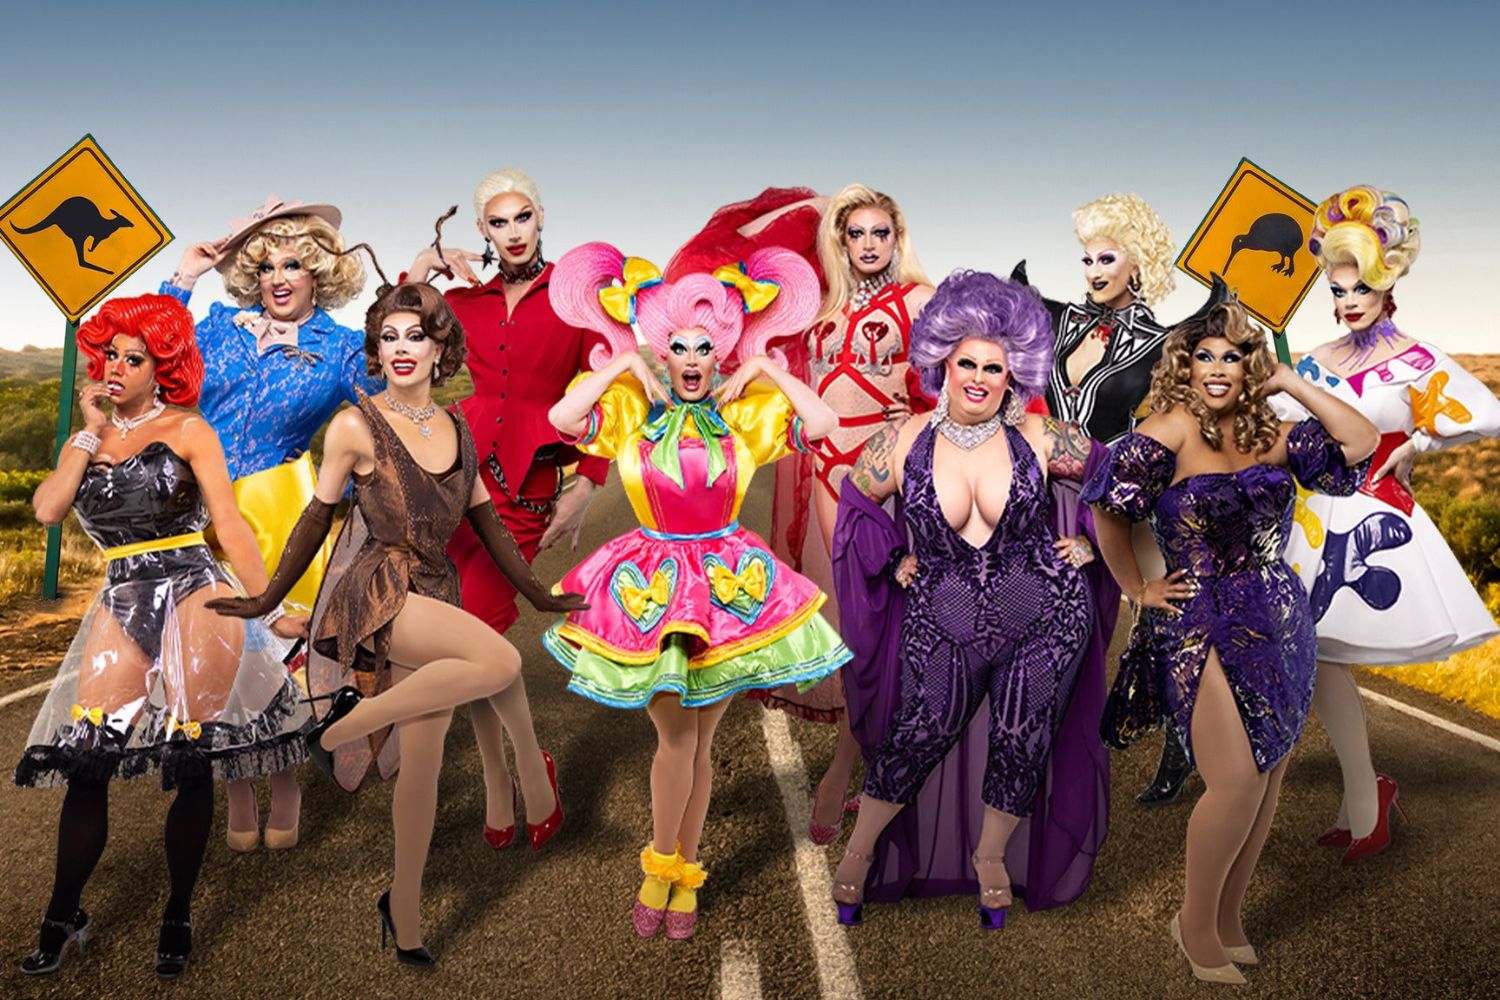 The stars of RuPauls Drag Race Down Under are appearing live on stage this October